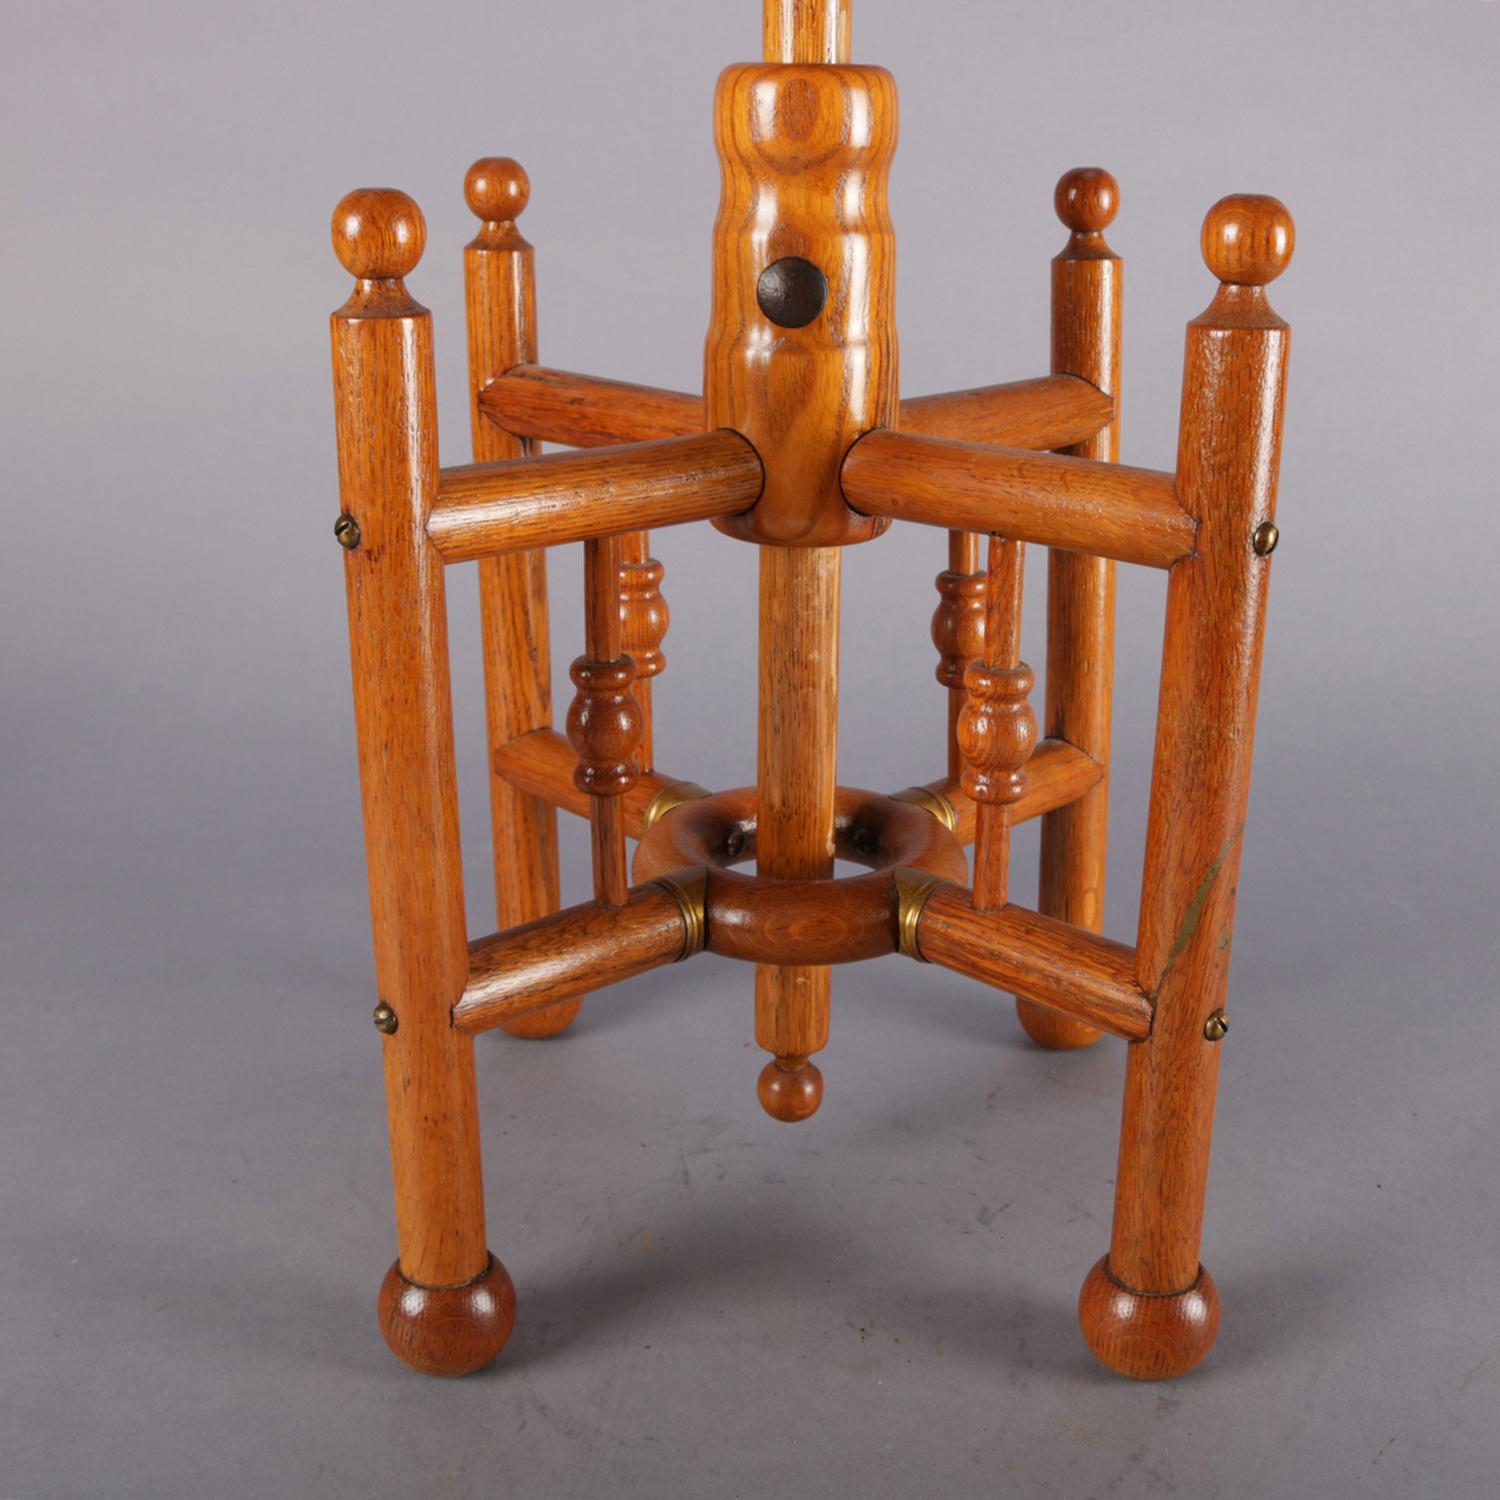 19th Century Antique Carved Oak Stick and Ball Adjustable Piano Stool, circa 1880